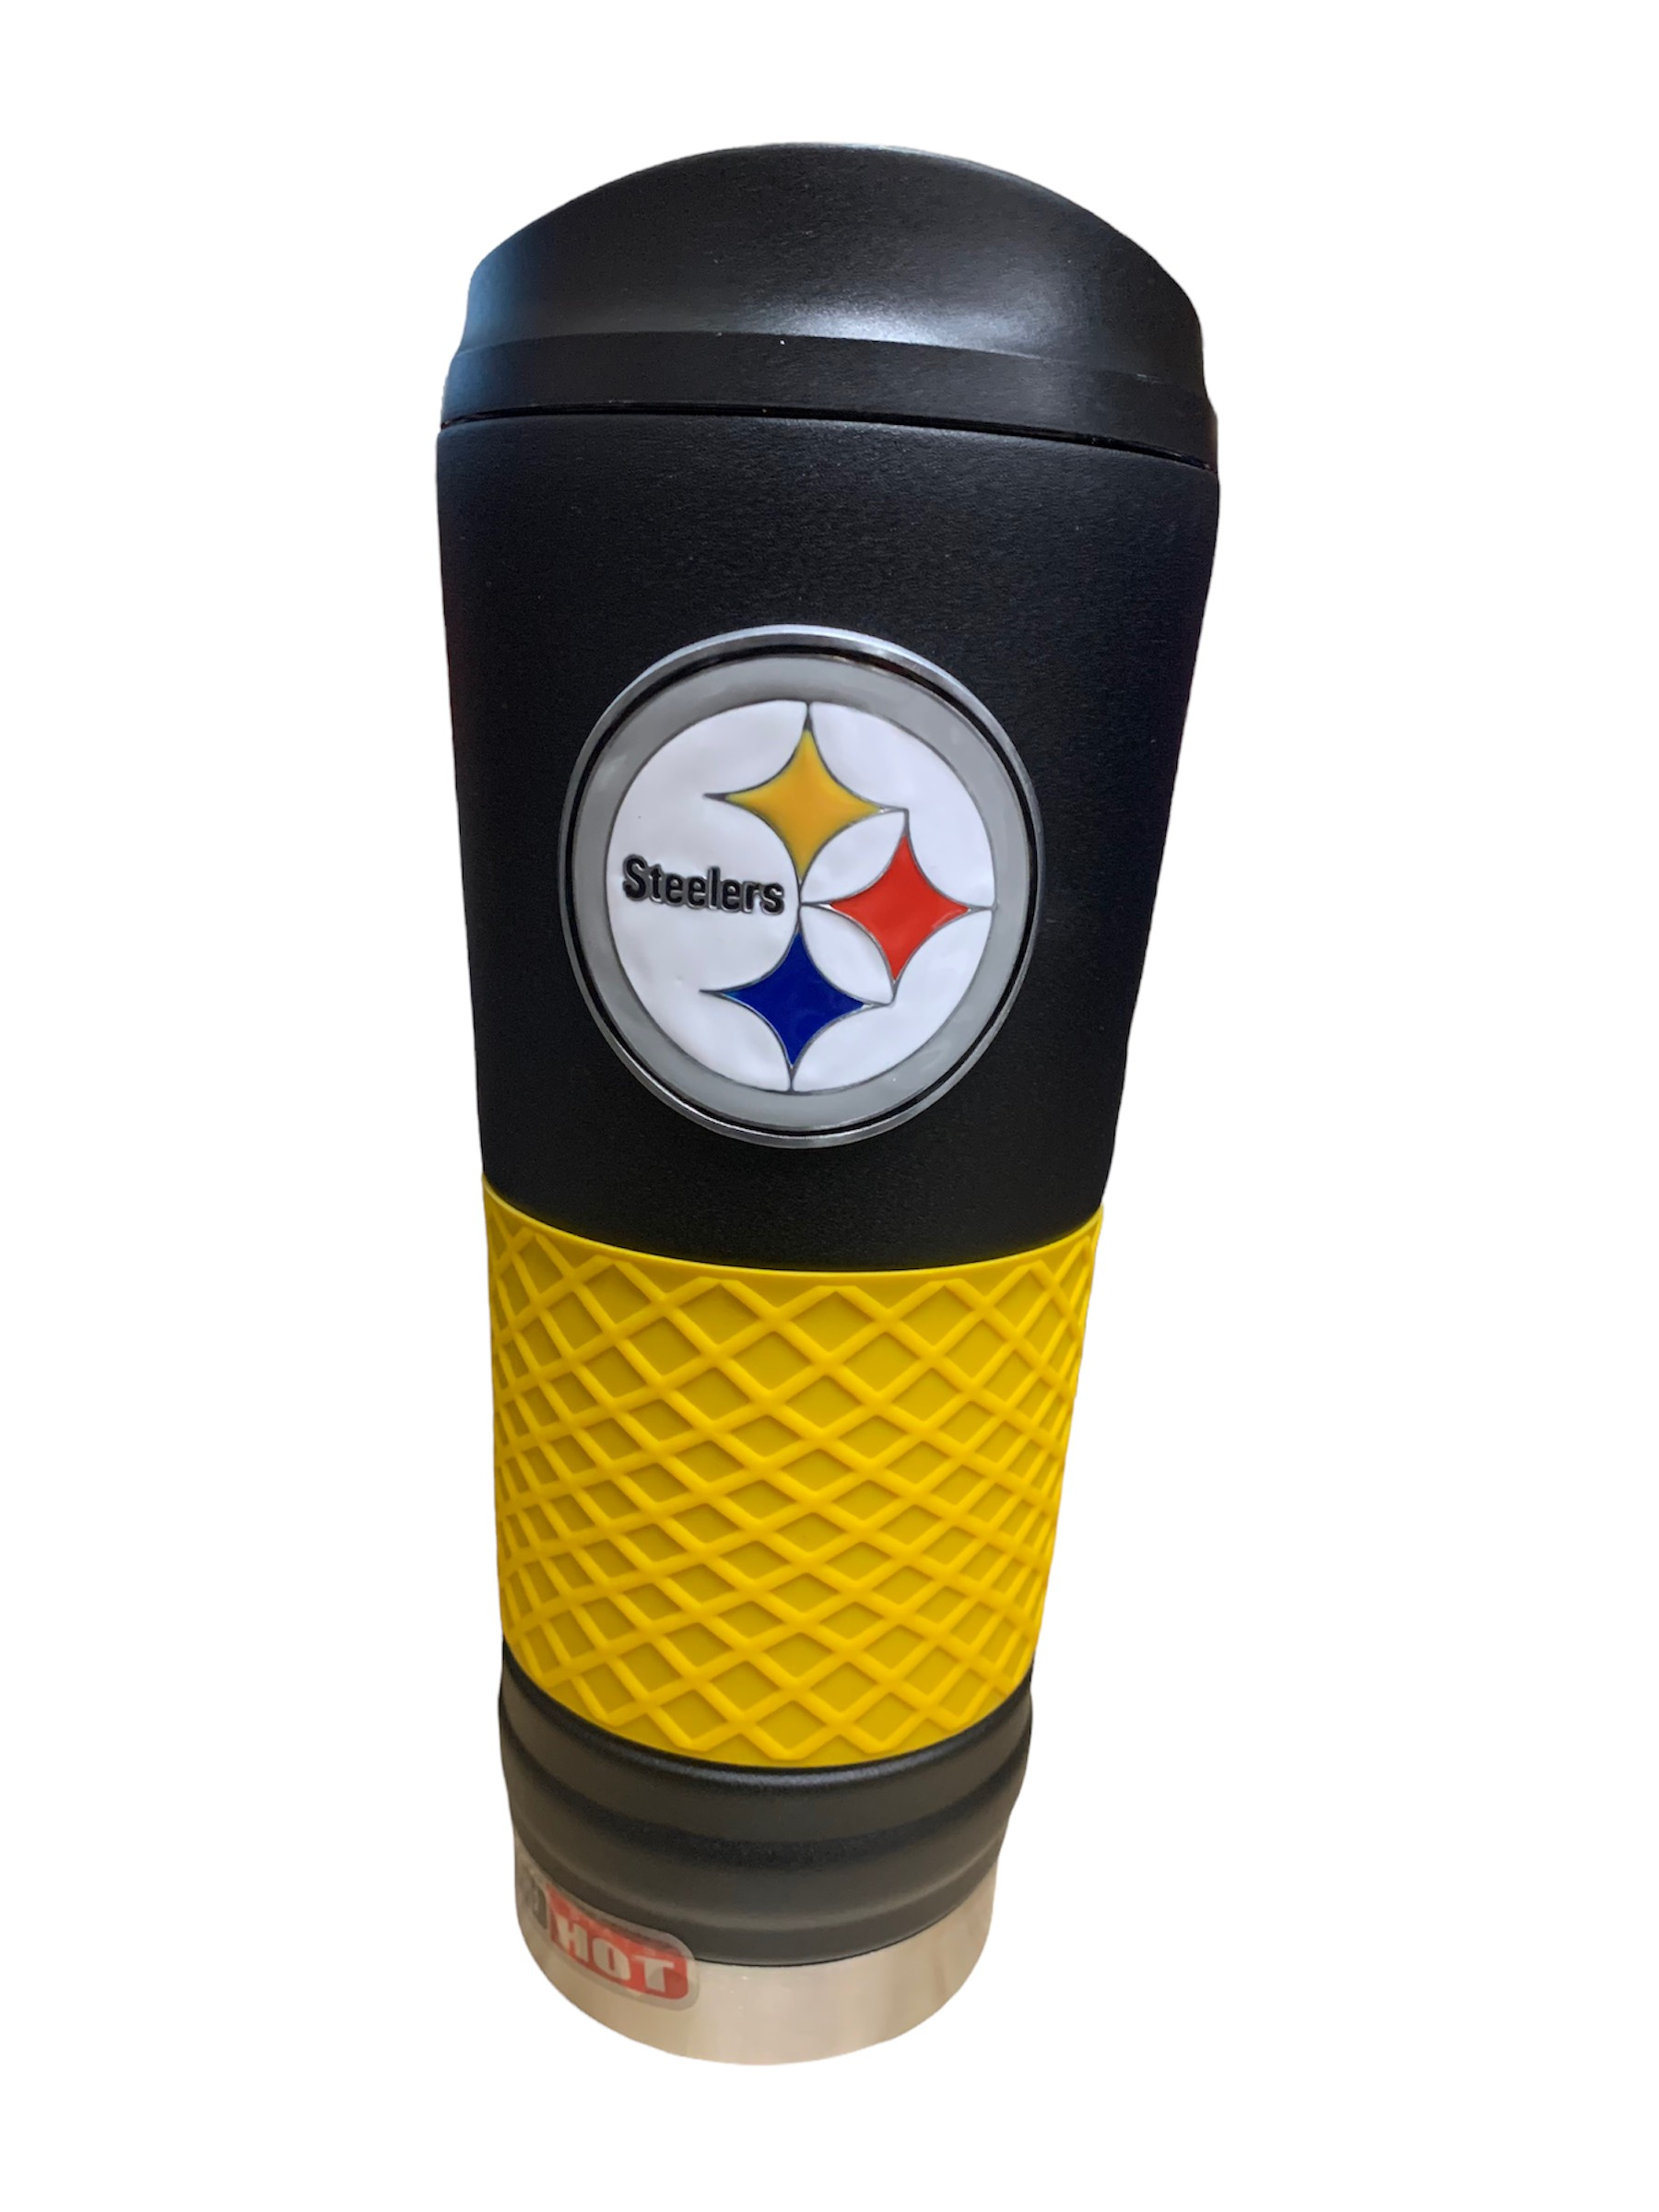 Pittsburgh Steelers Stainless Steel Tumbler Gift Set